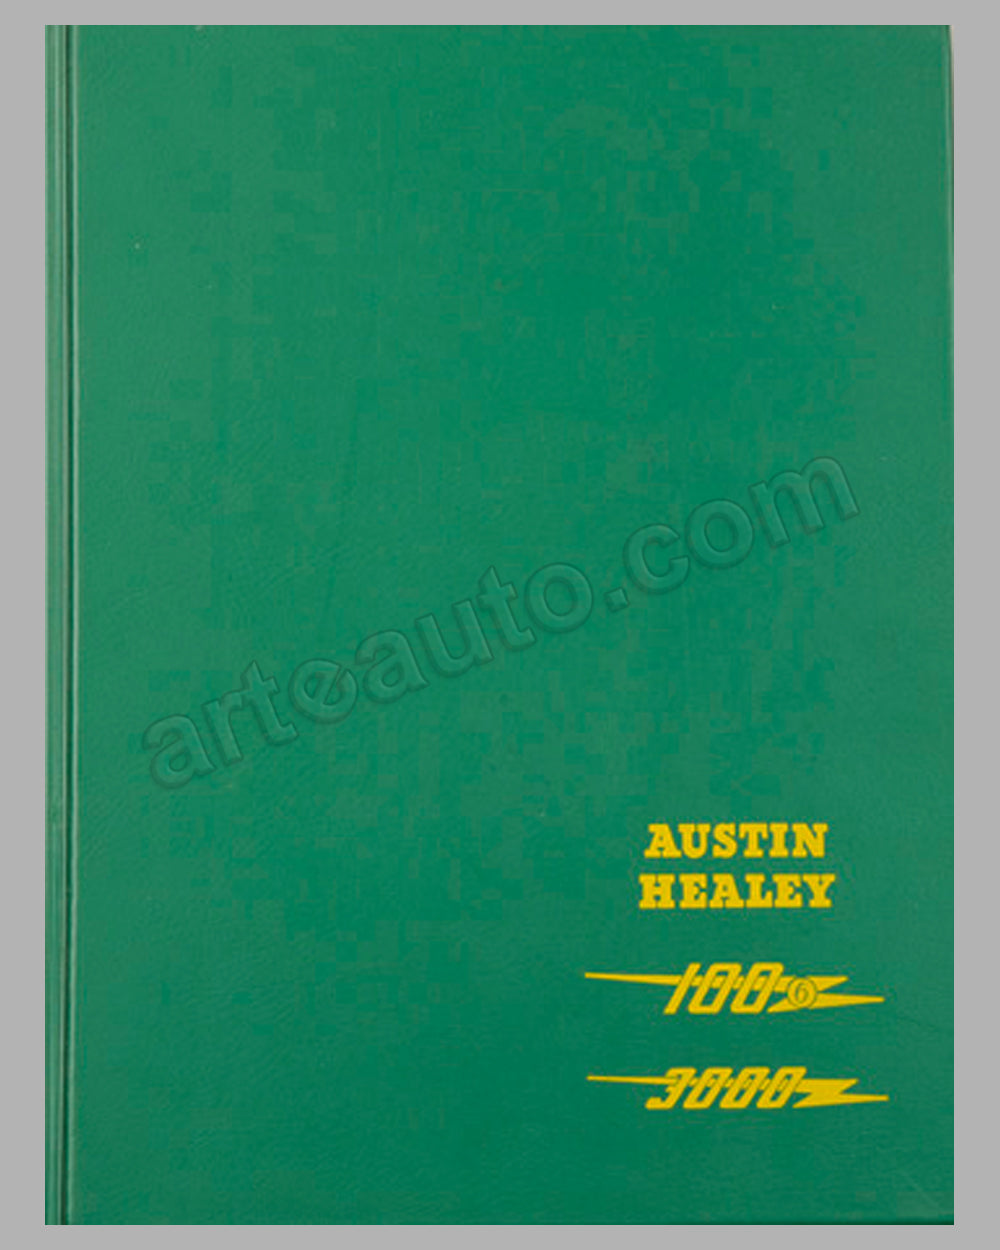 Austin-Healey 100/6 and 3000 Workshop Manual published by the factory